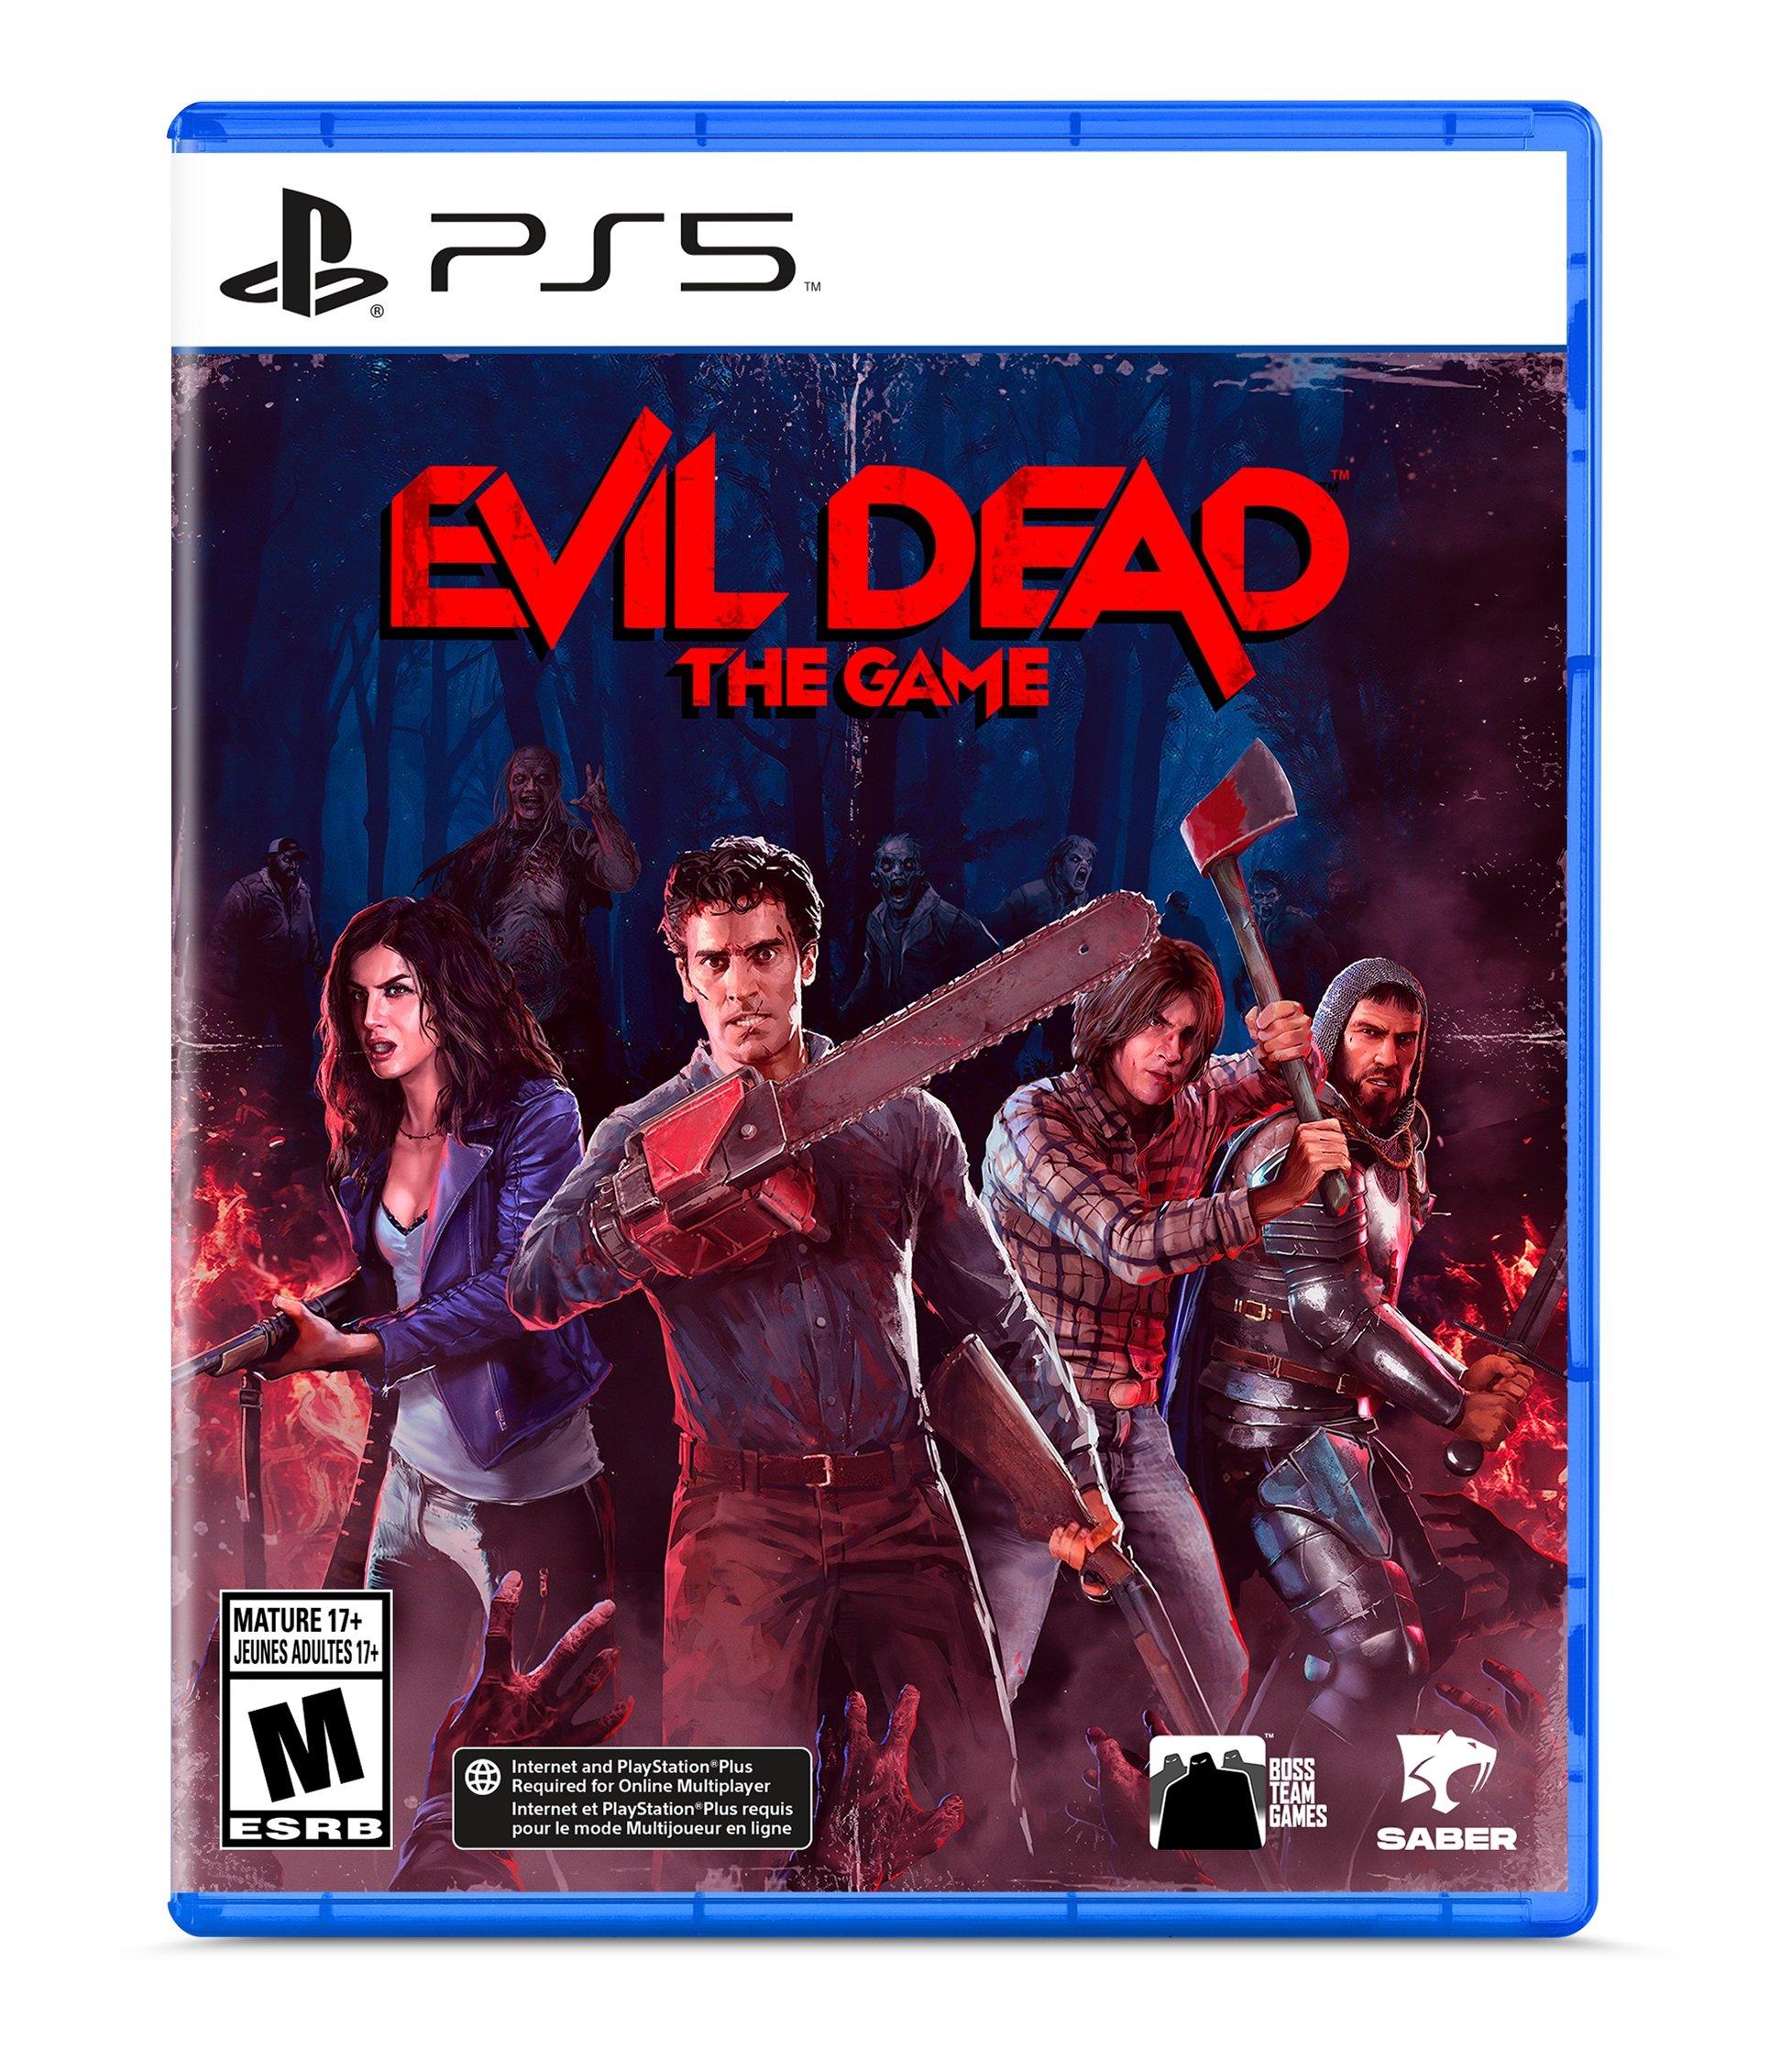 Evil Dead: The Game Slays with 500,000 Copies Sold in 5 Days 